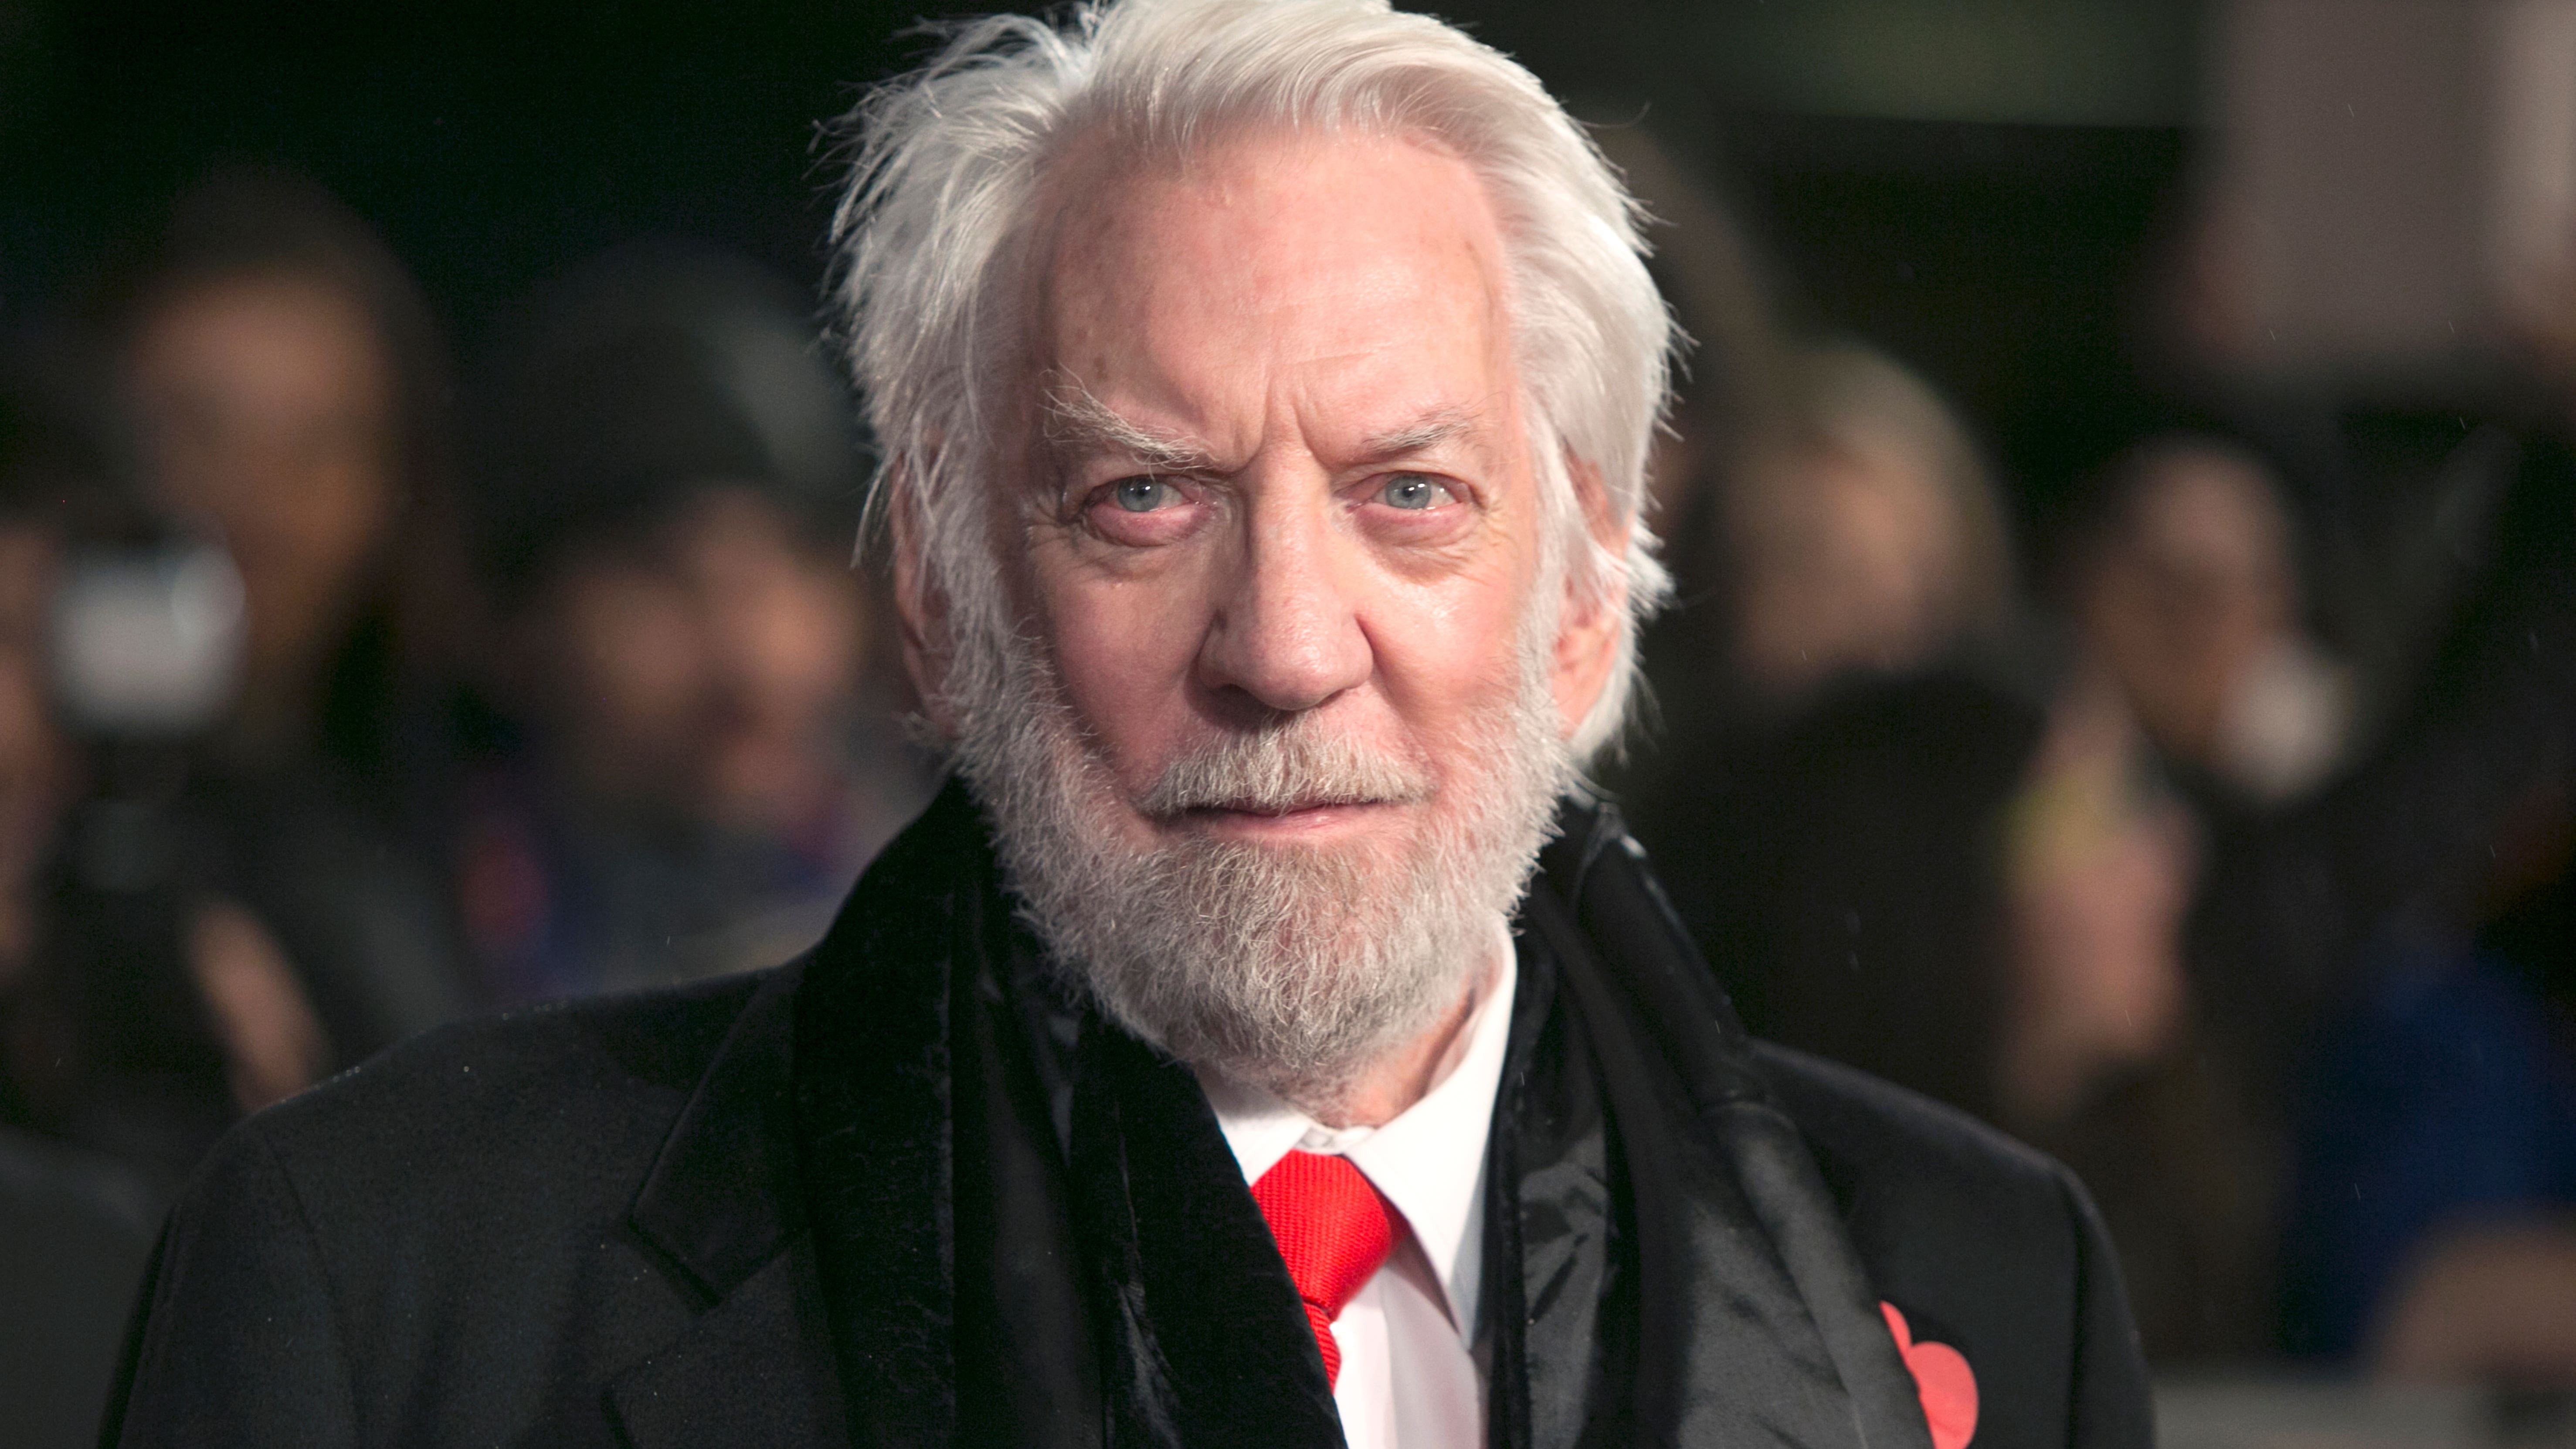 Hunger Games star Donald Sutherland dies aged 88